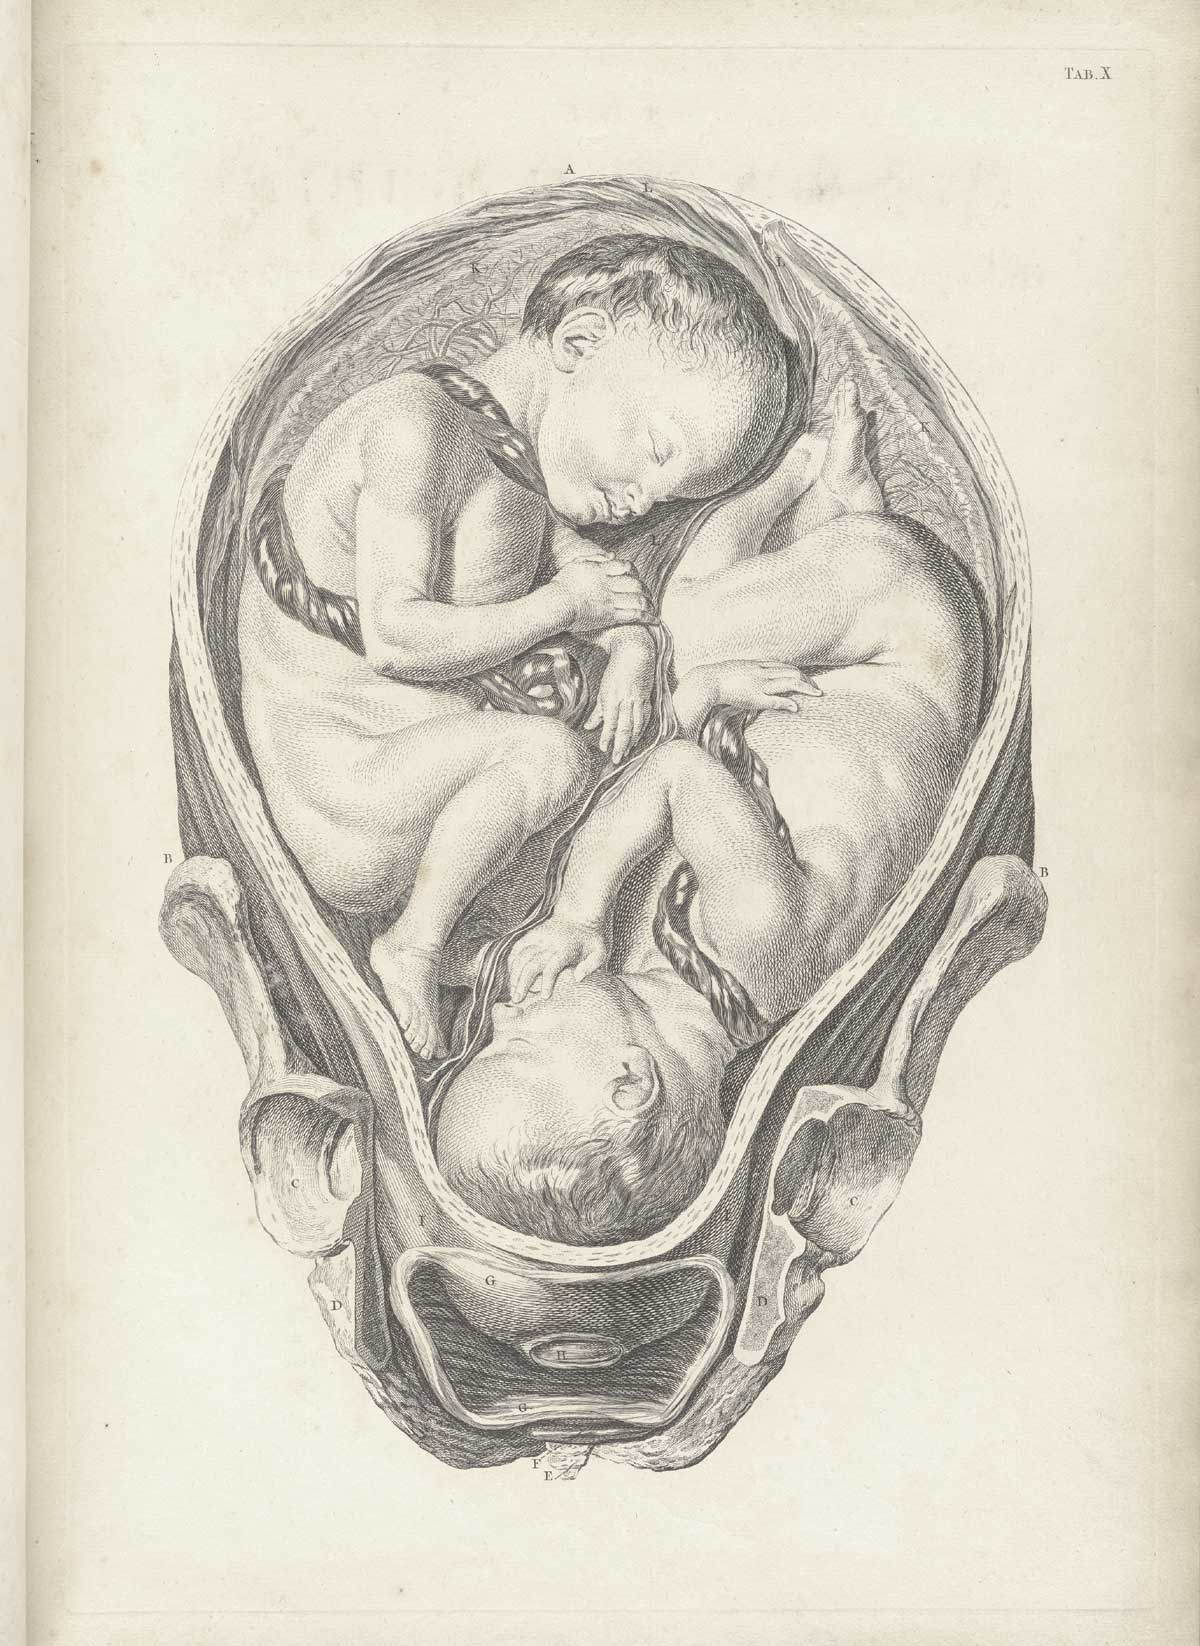 Table 10 of William Smellie's A sett of anatomical tables, with explanations, and an abridgment, of the practice of midwifery, featuring the illustrated drawing of a woman's pelvis and uterus with twin fetus.